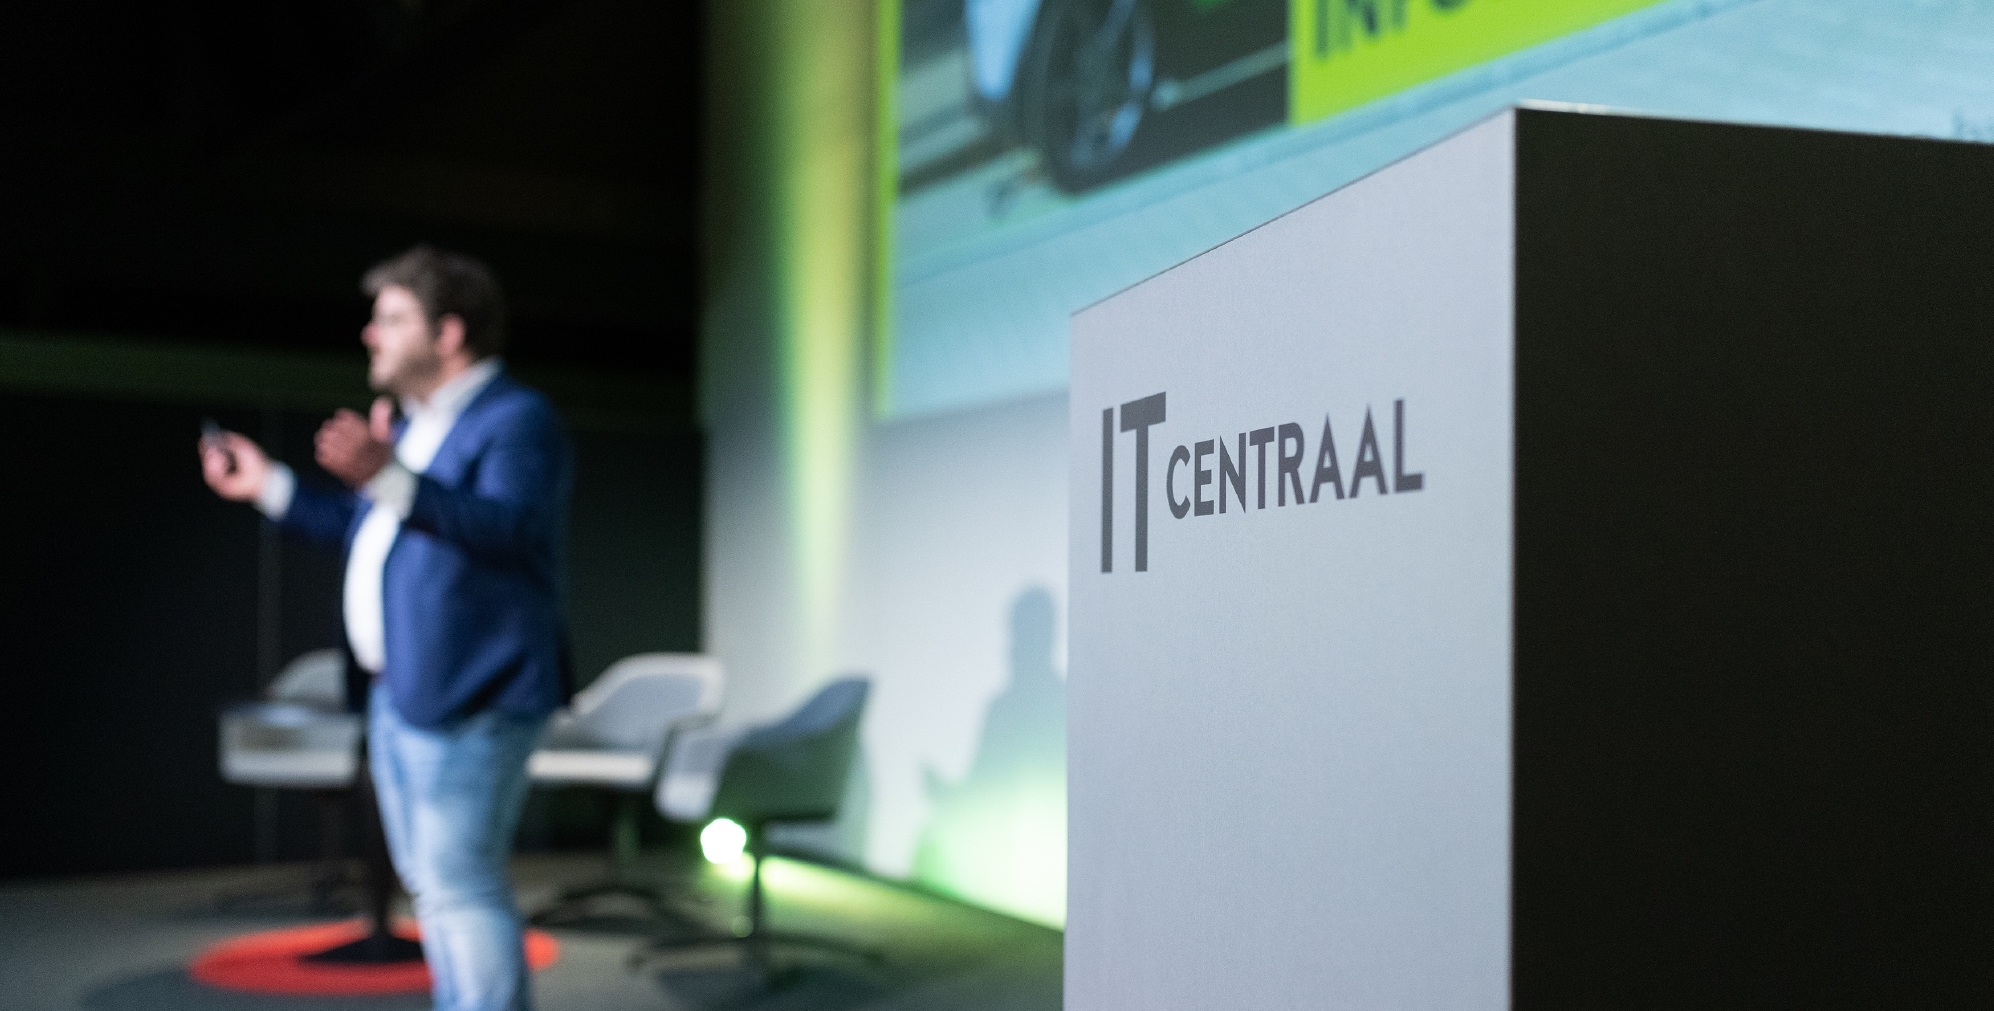 IT Centraal event